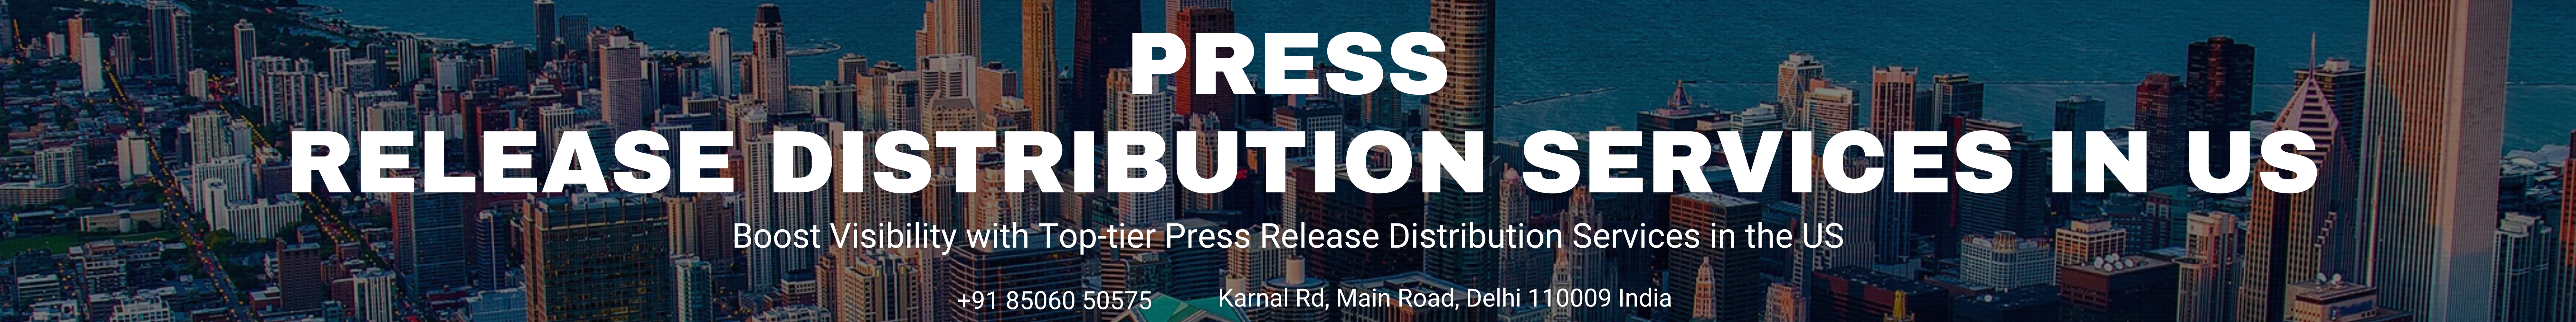 Press Release Distribution Services in US